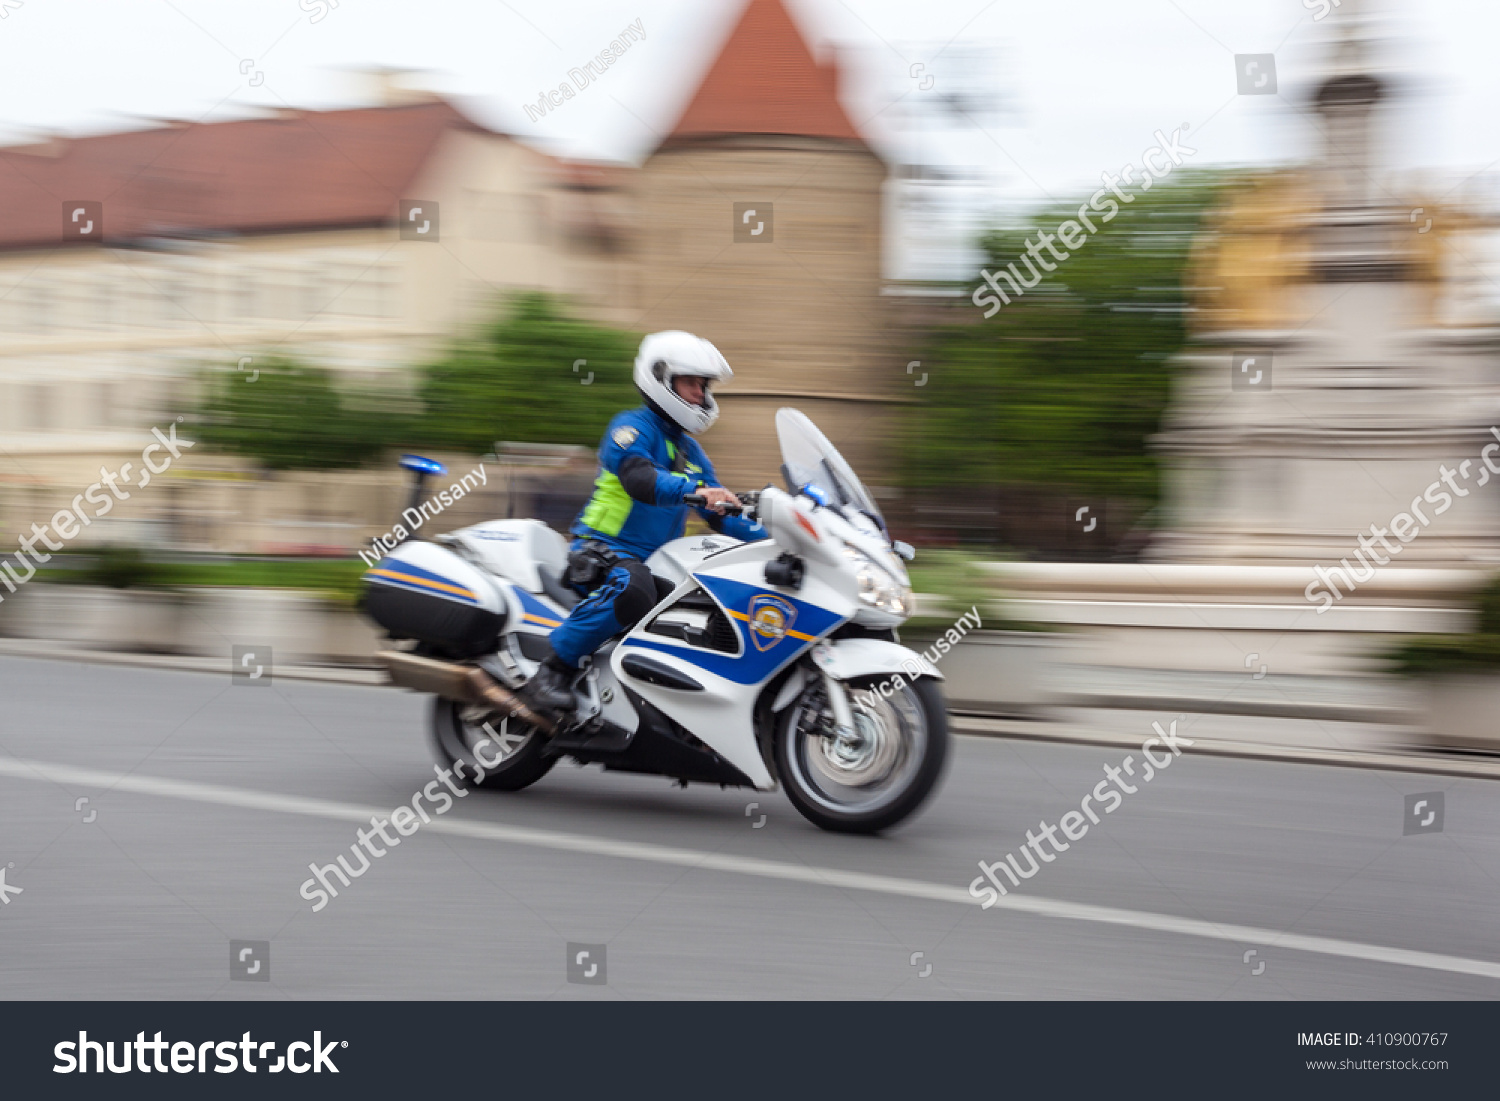 ZAGREB, CROATIA - APRIL 24, 2016: - International cycling race Tour of Croatia 2016. - Stage 6. Policeman on motorcycle passing by cathedral. #410900767